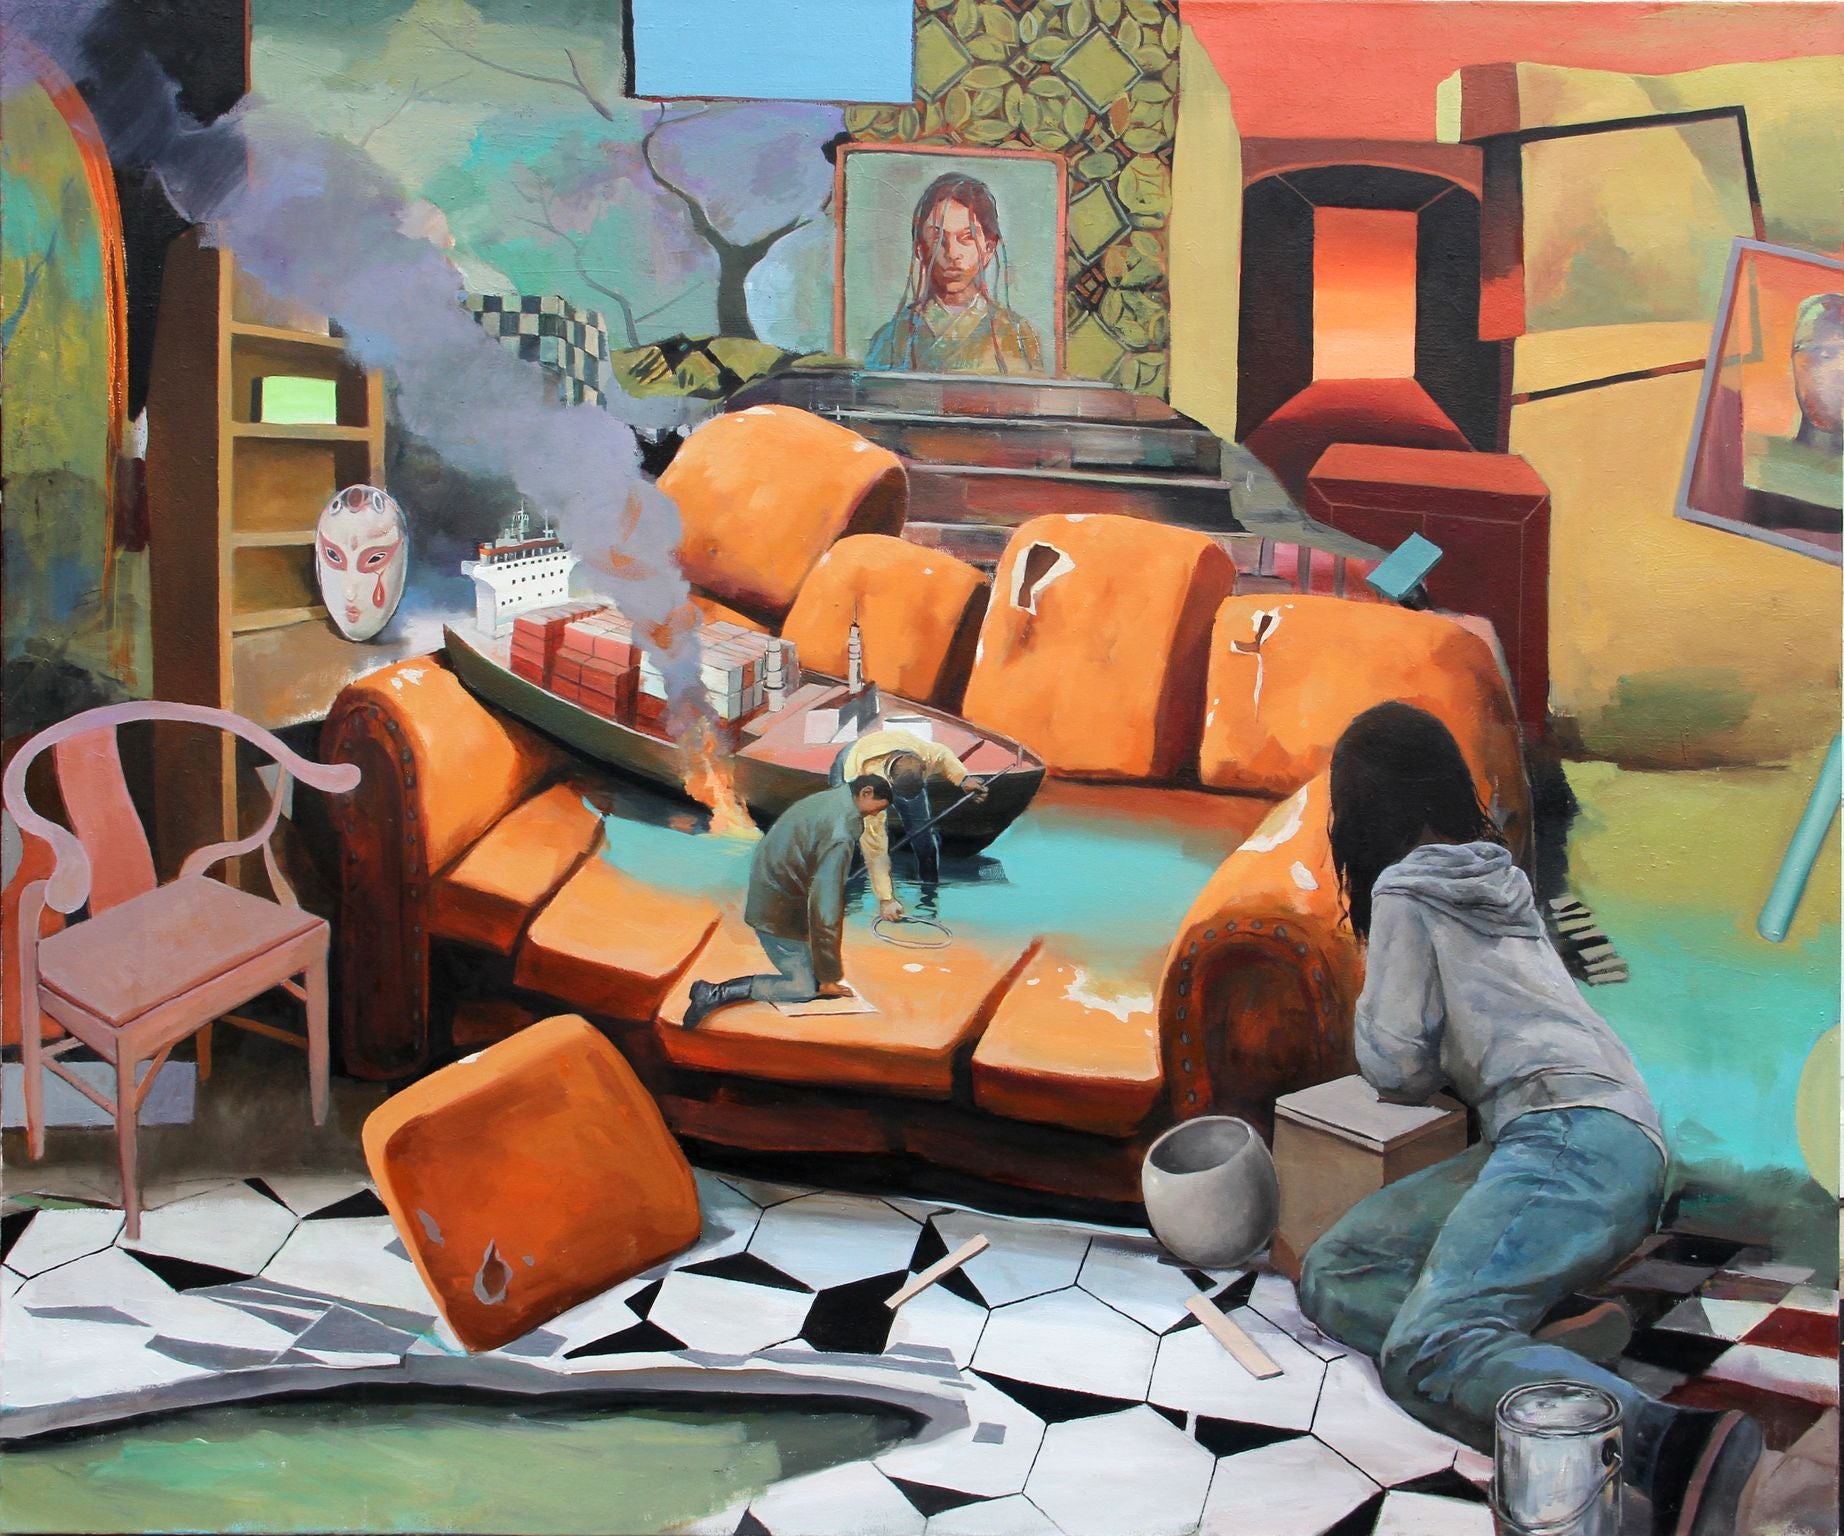 Furong Zhang, "Ship on a Couch"